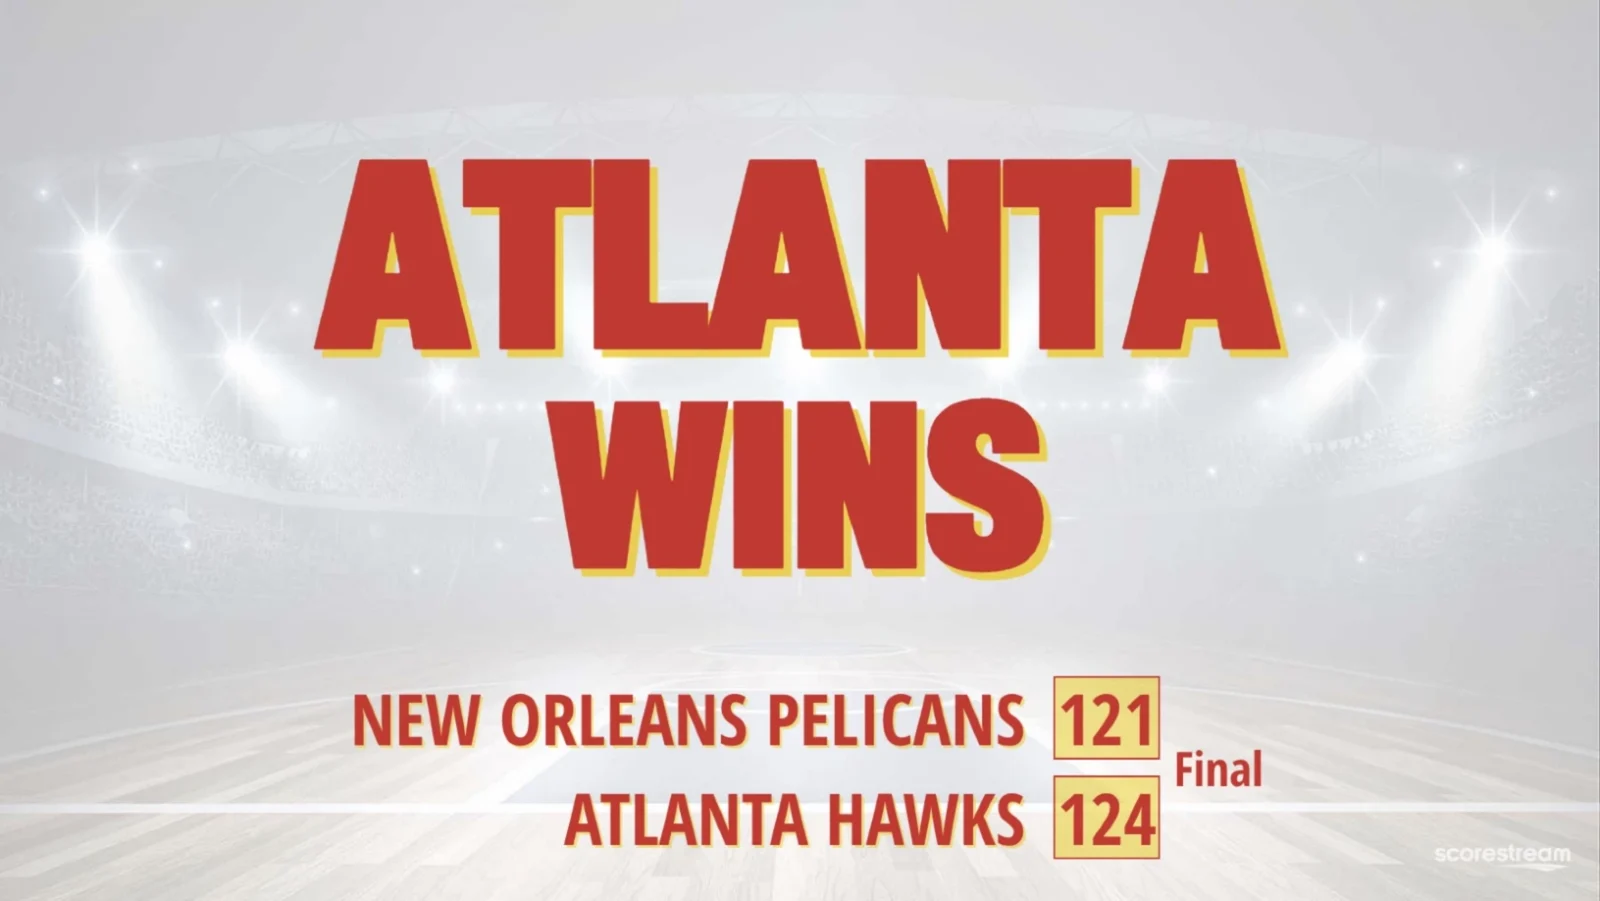 Atlanta Hawks defeated the New Orleans Pelicans in NBA scores